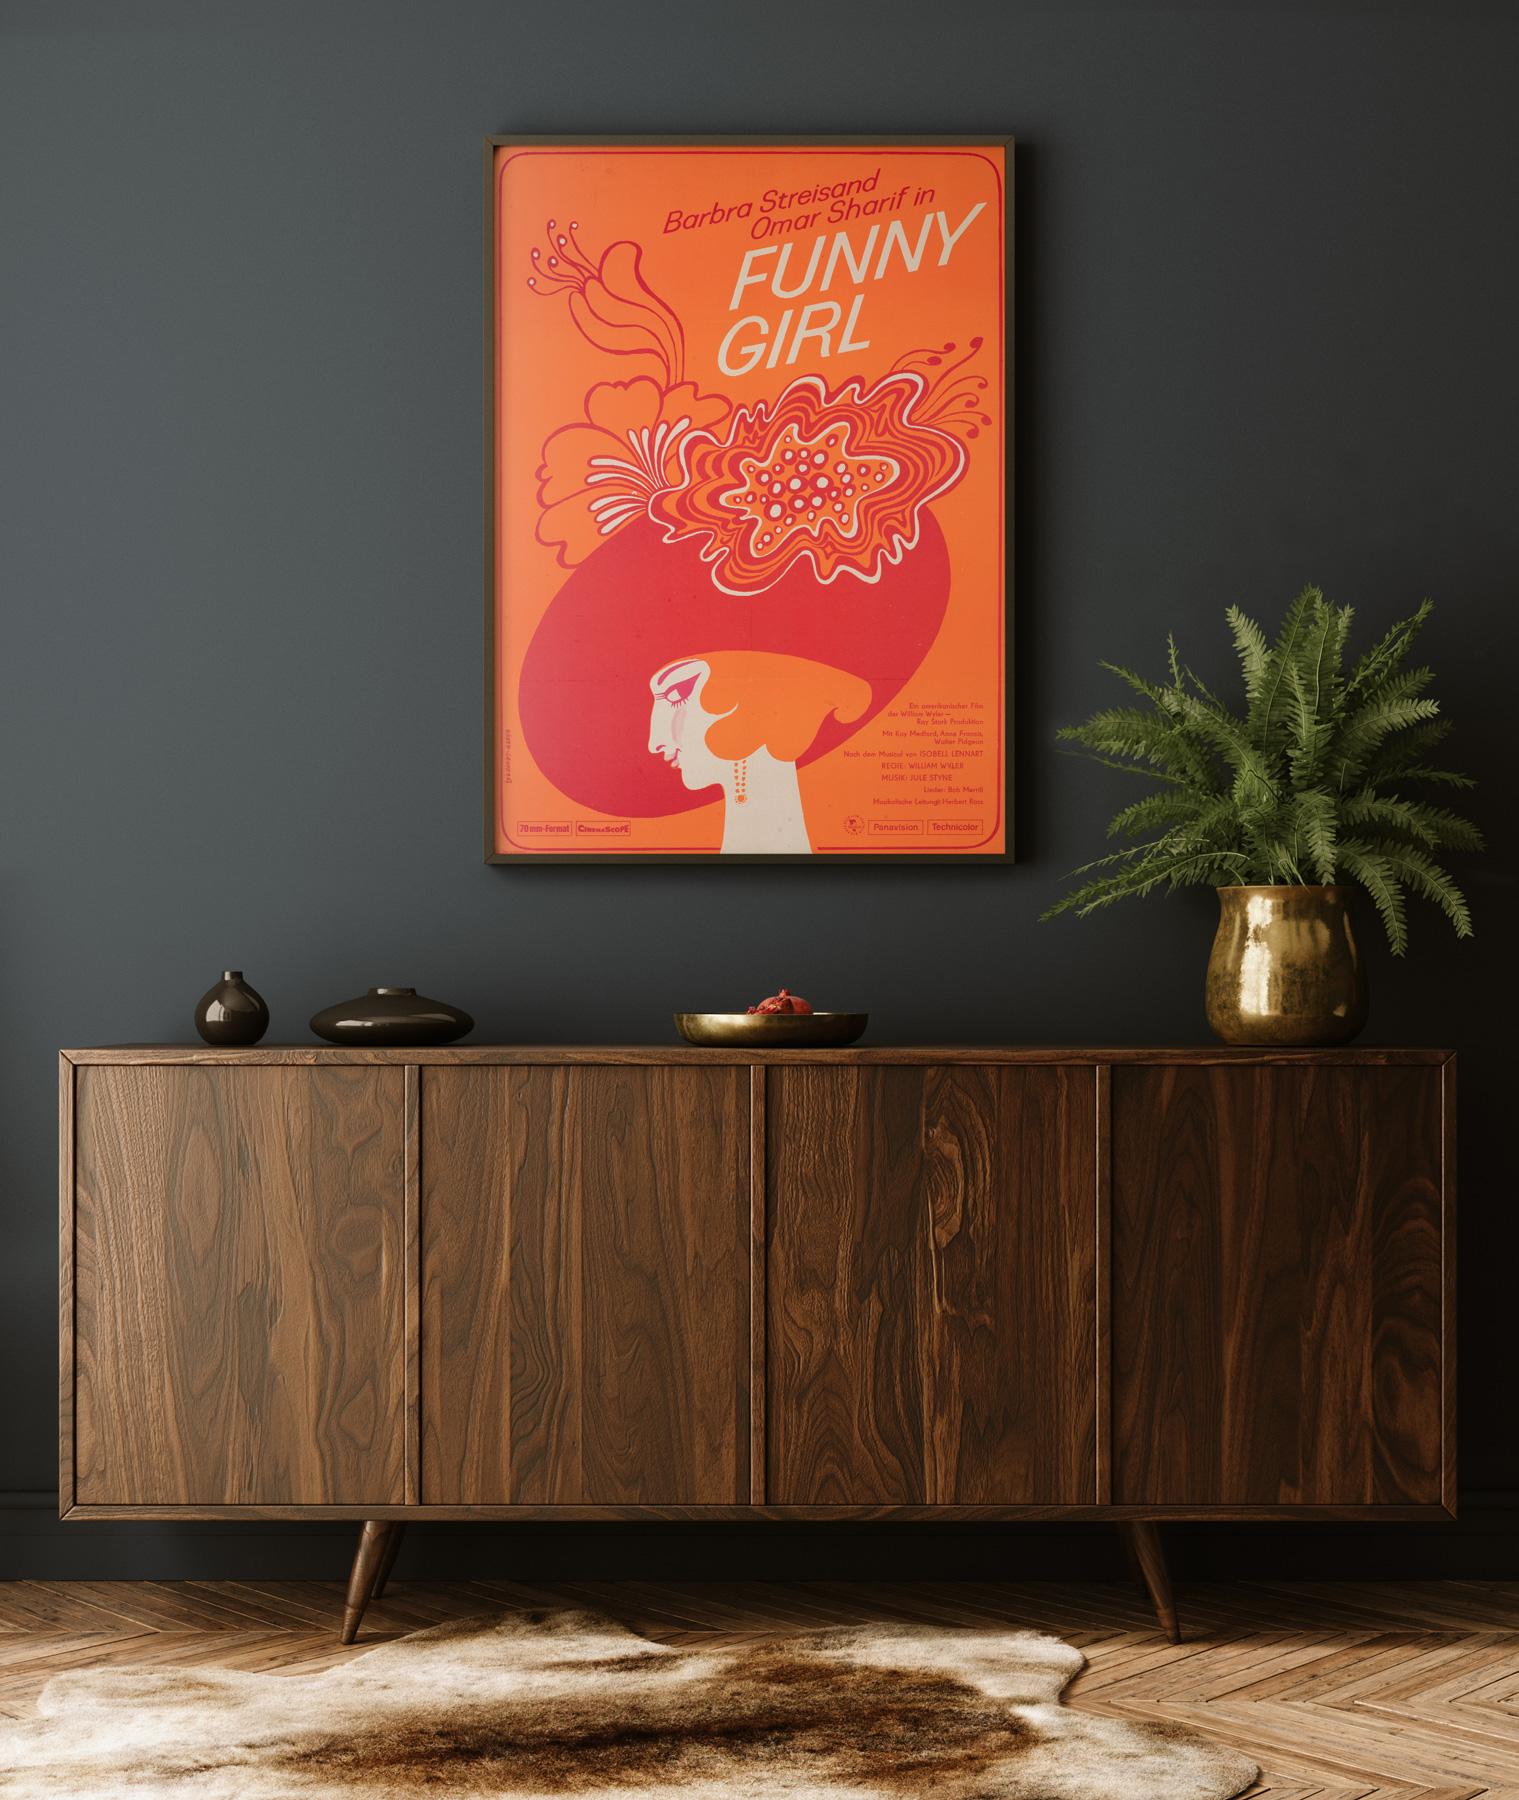 Charming design by Roeder features on this original East German film poster for Funny Girl starring Barbra Streisand and Omar Sharif.

This original vintage movie poster is professionally line backed and sized 22 1/2 x 32 inches inches. It will be